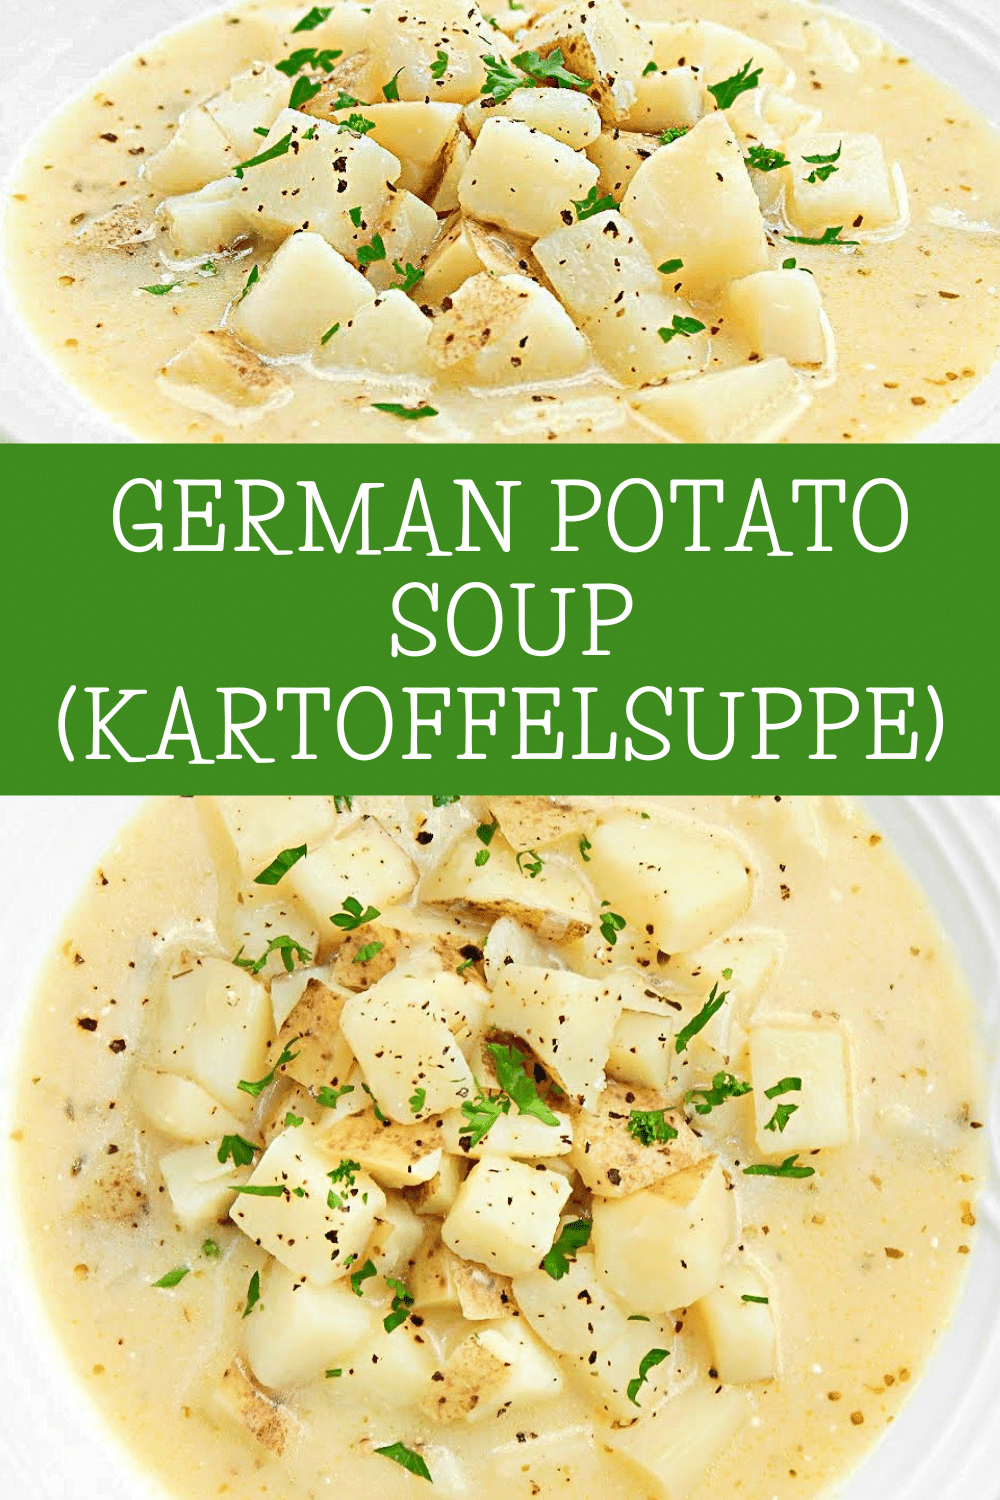 German Potato Soup (Kartoffelsuppe) ~Aromatic and chunky potato soup that's easy to make with staple ingredients and tastes even better the next day! via @thiswifecooks